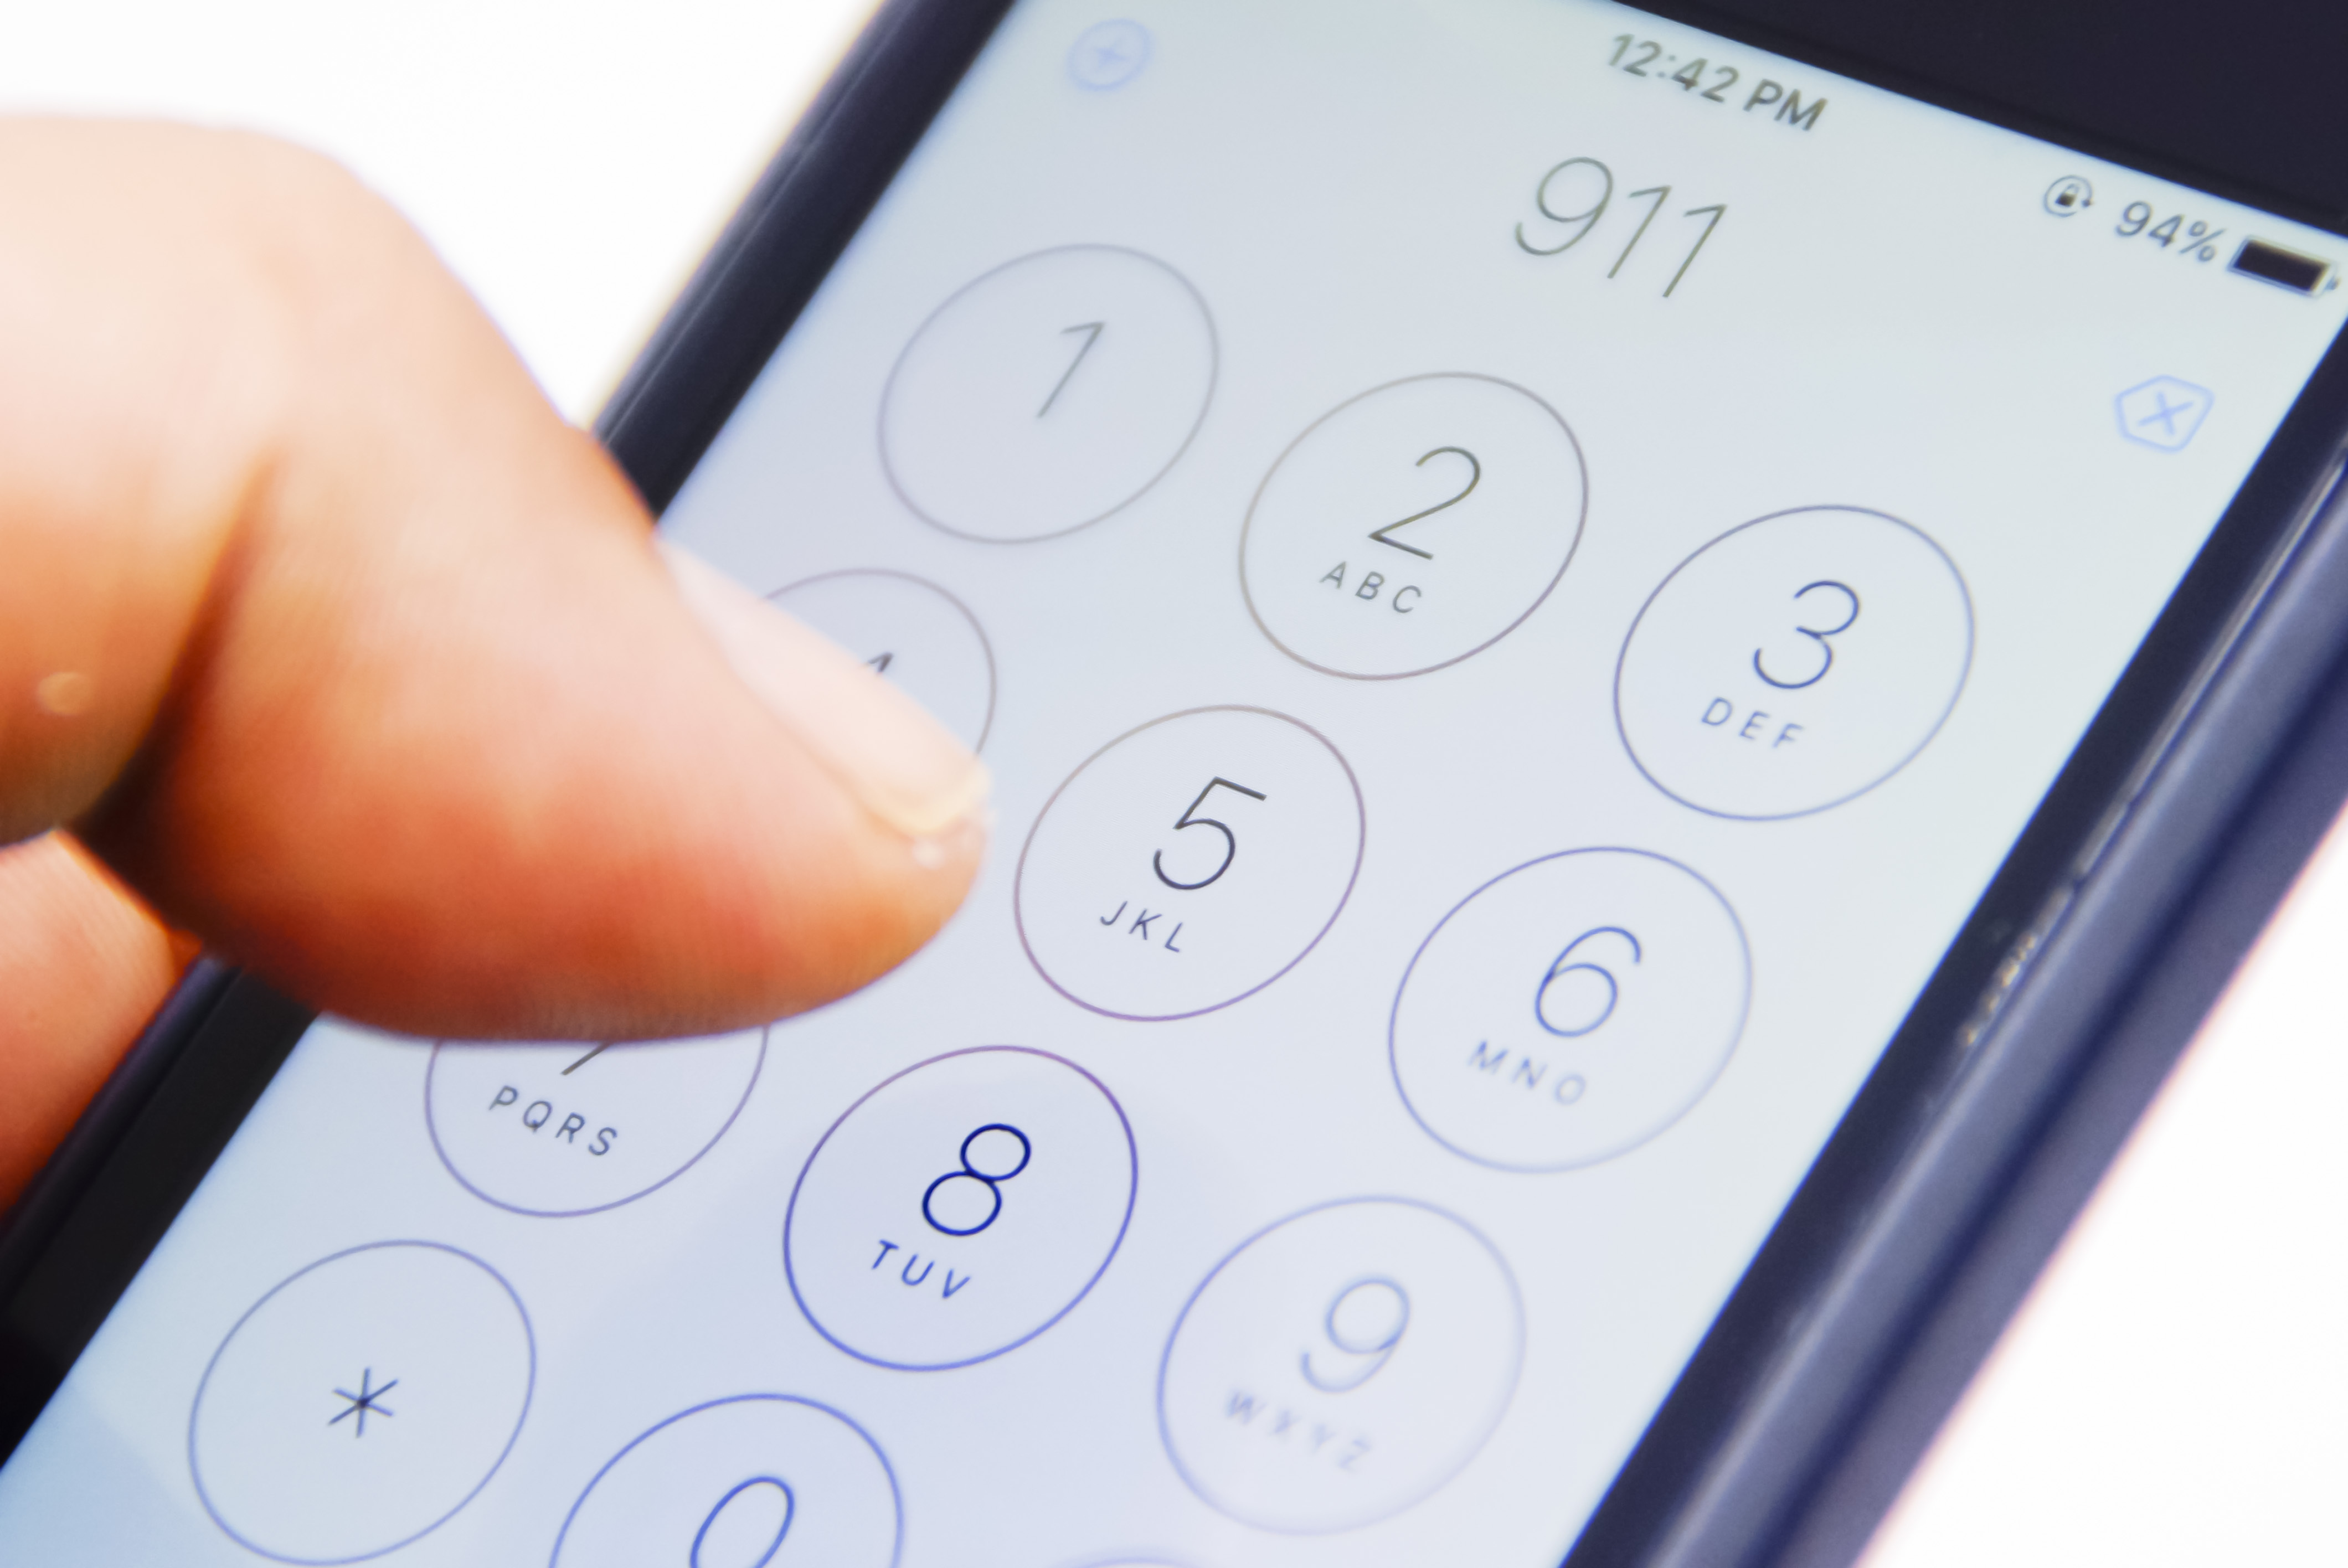 A person dialing 911 on their phone | Source: Shutterstock